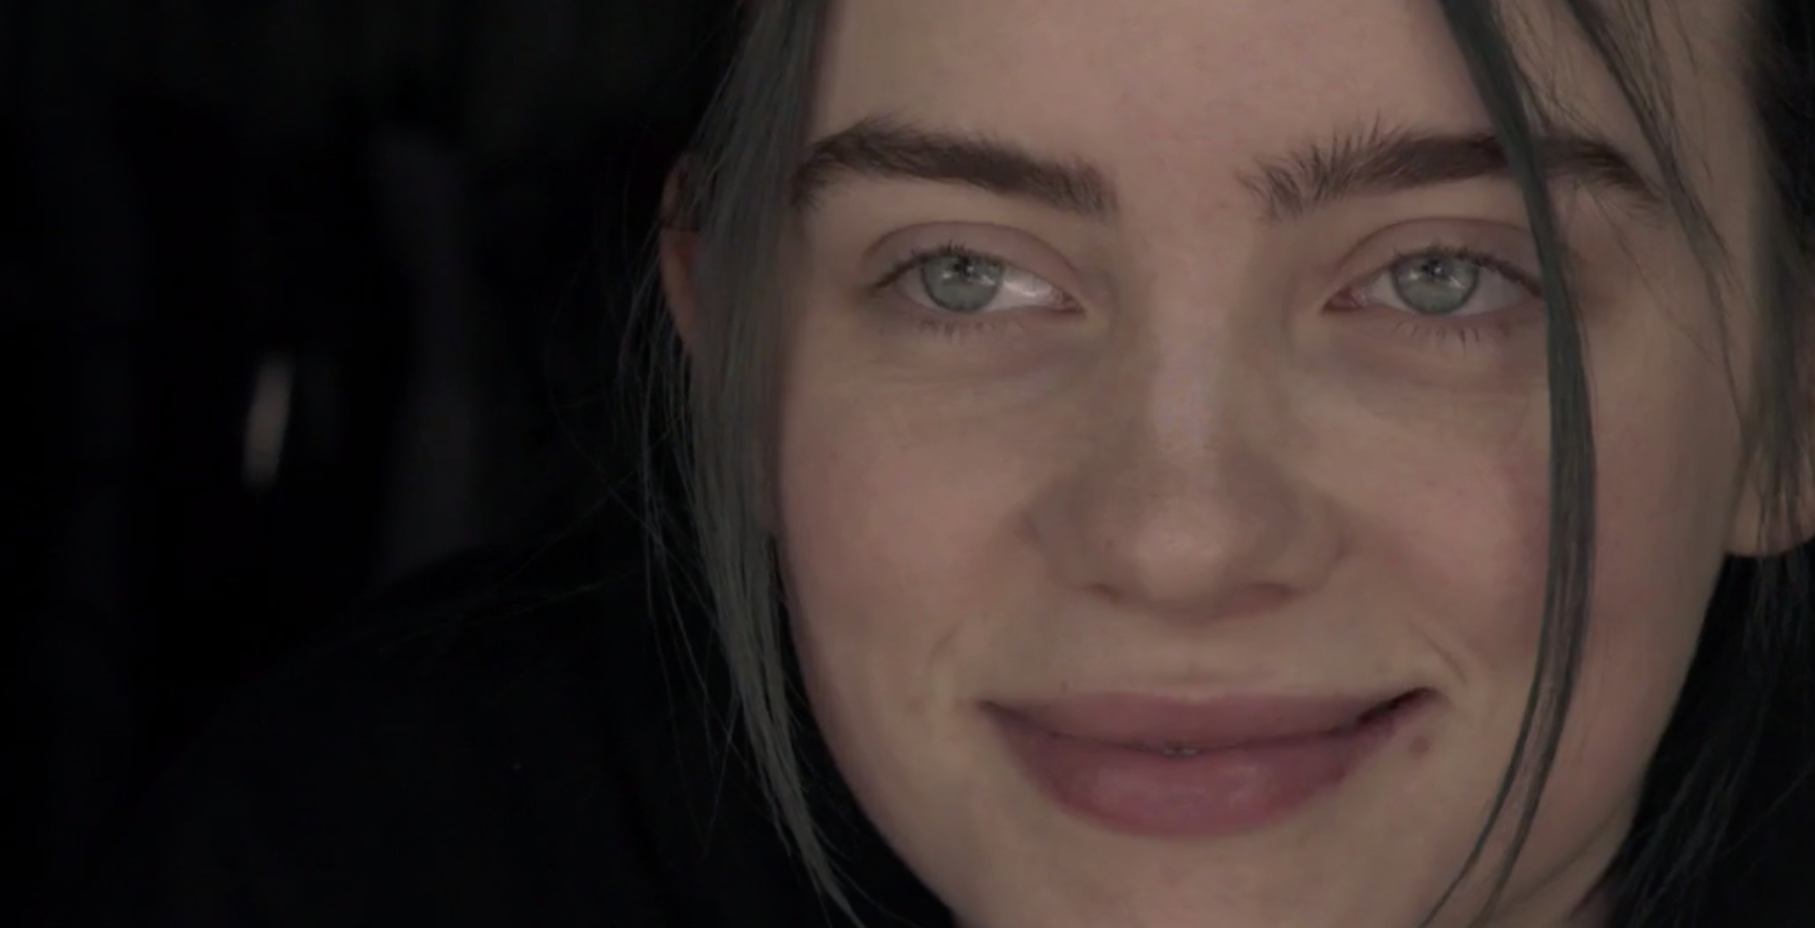 Billie Eilish: The World's A Little Blurry - Plugged In